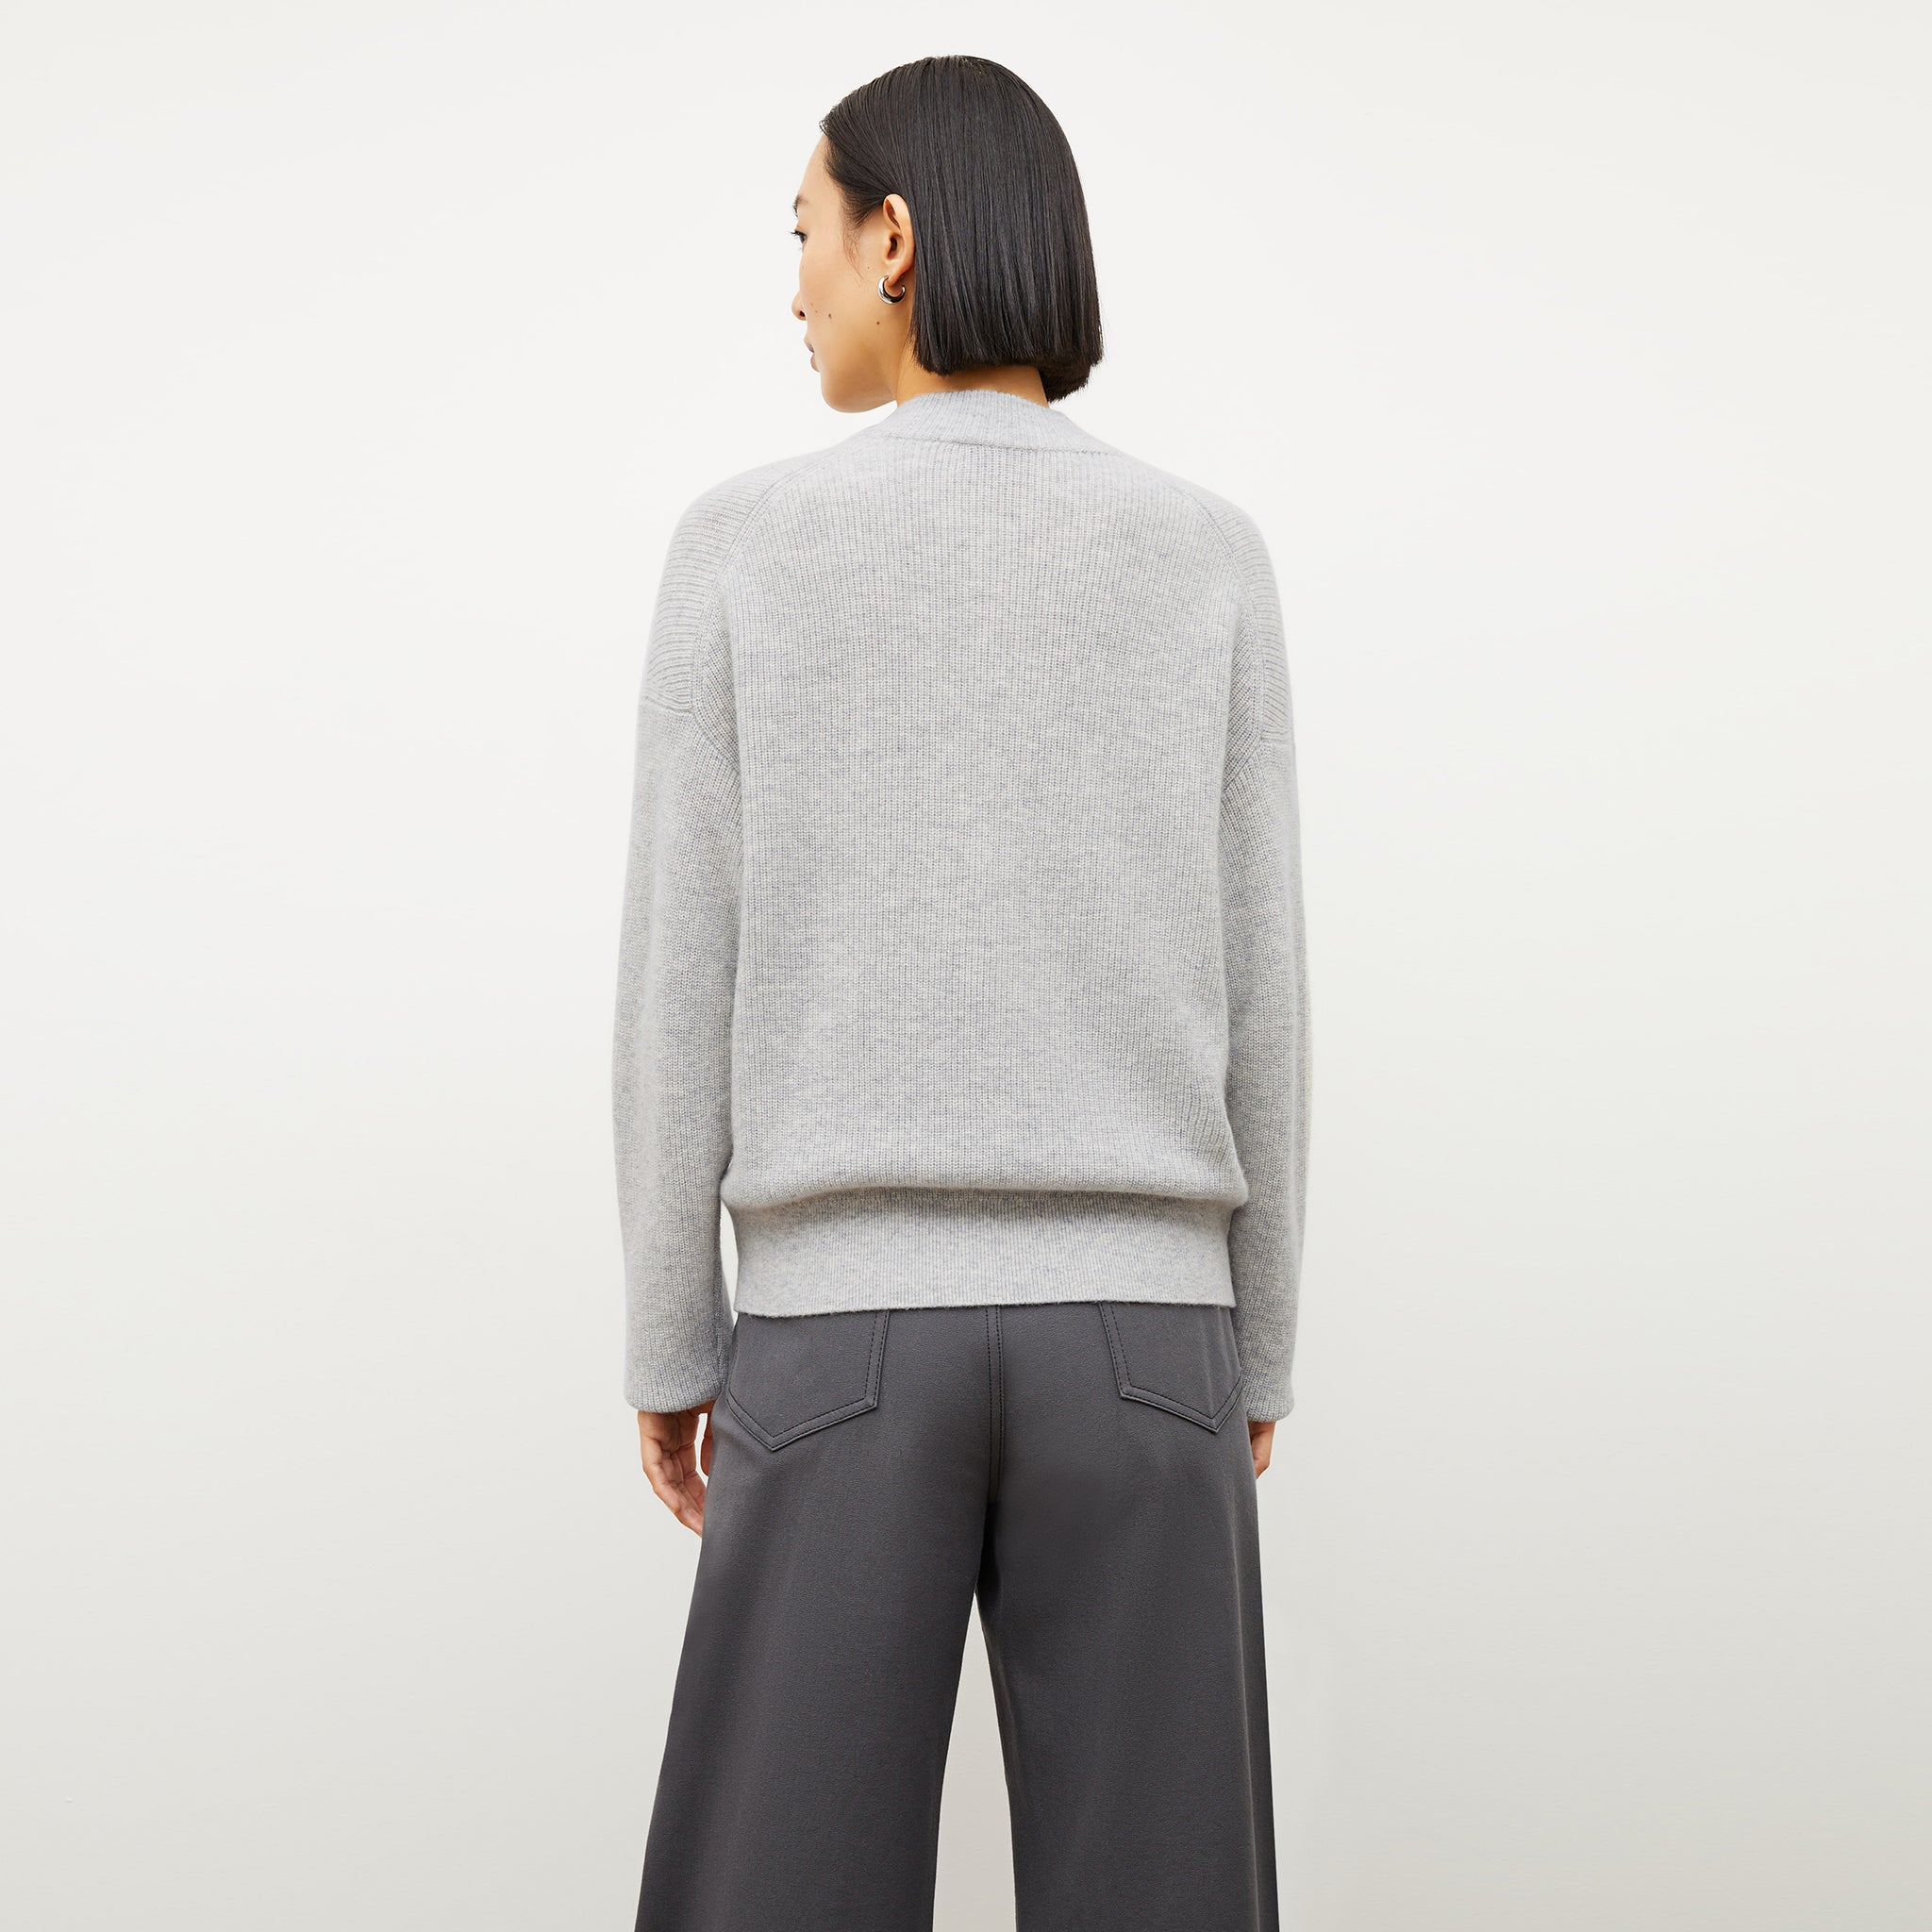 Back image of a woman wearing the cece sweater in light heather gray